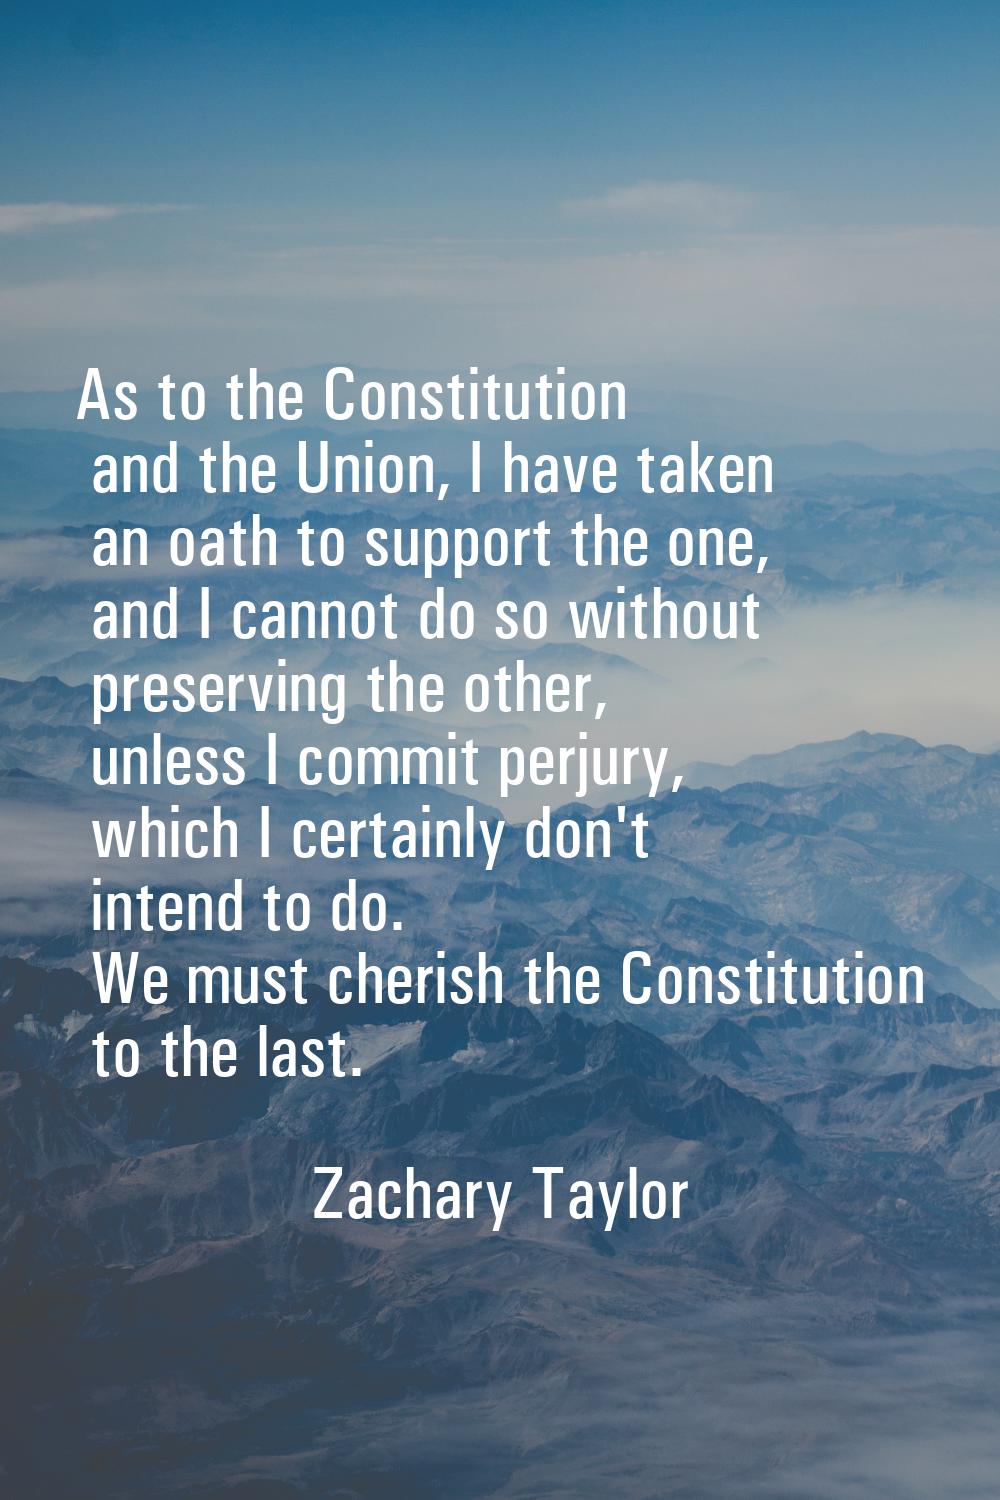 As to the Constitution and the Union, I have taken an oath to support the one, and I cannot do so w